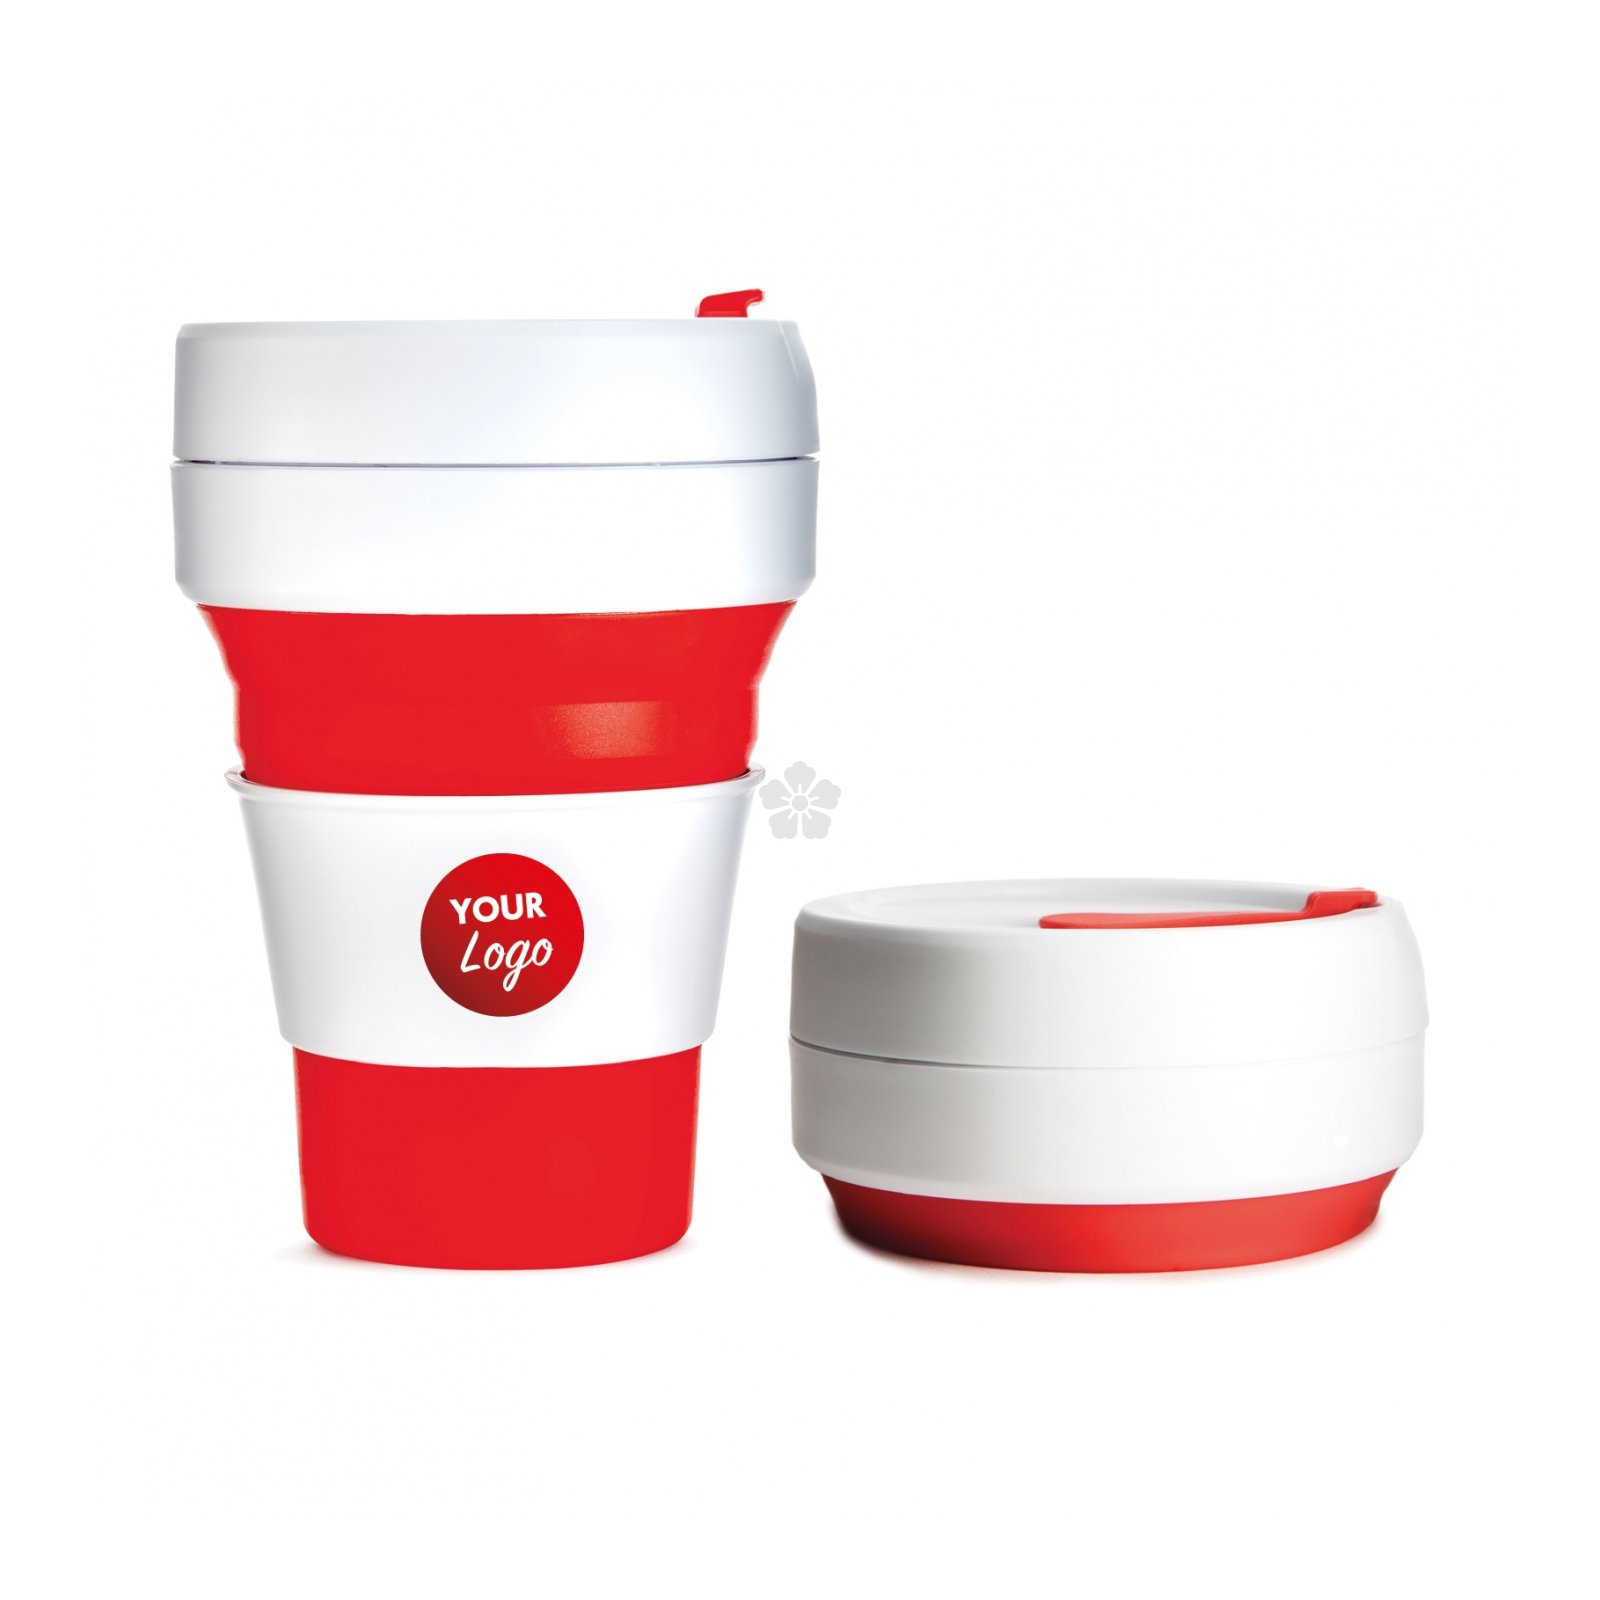 Cup файлы. Stojo кружки. Collapsible Coffee Cup. Кружка stojo 350 мл. Collapsible Coffee Cup Silicone чертеж.